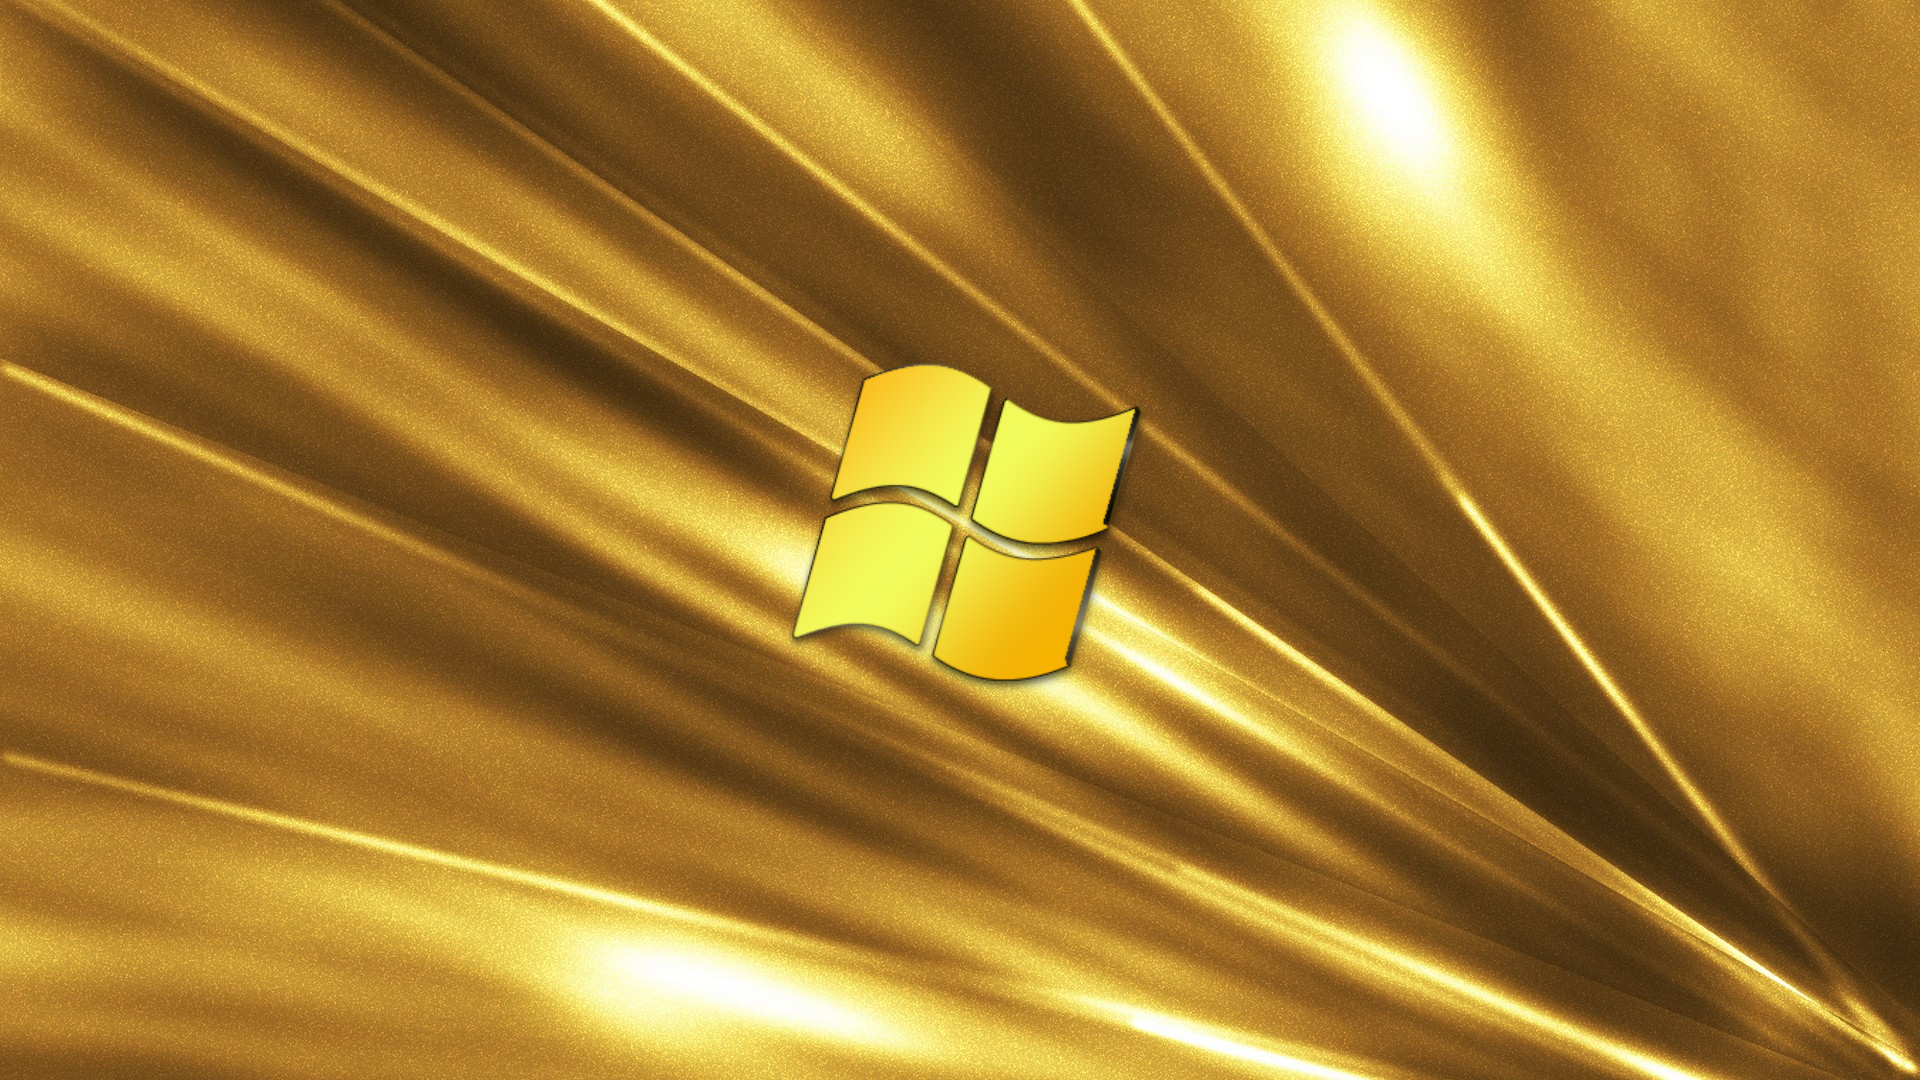 Gold Windows 7 Wallpapers I Made a While Back [1920x1080] r